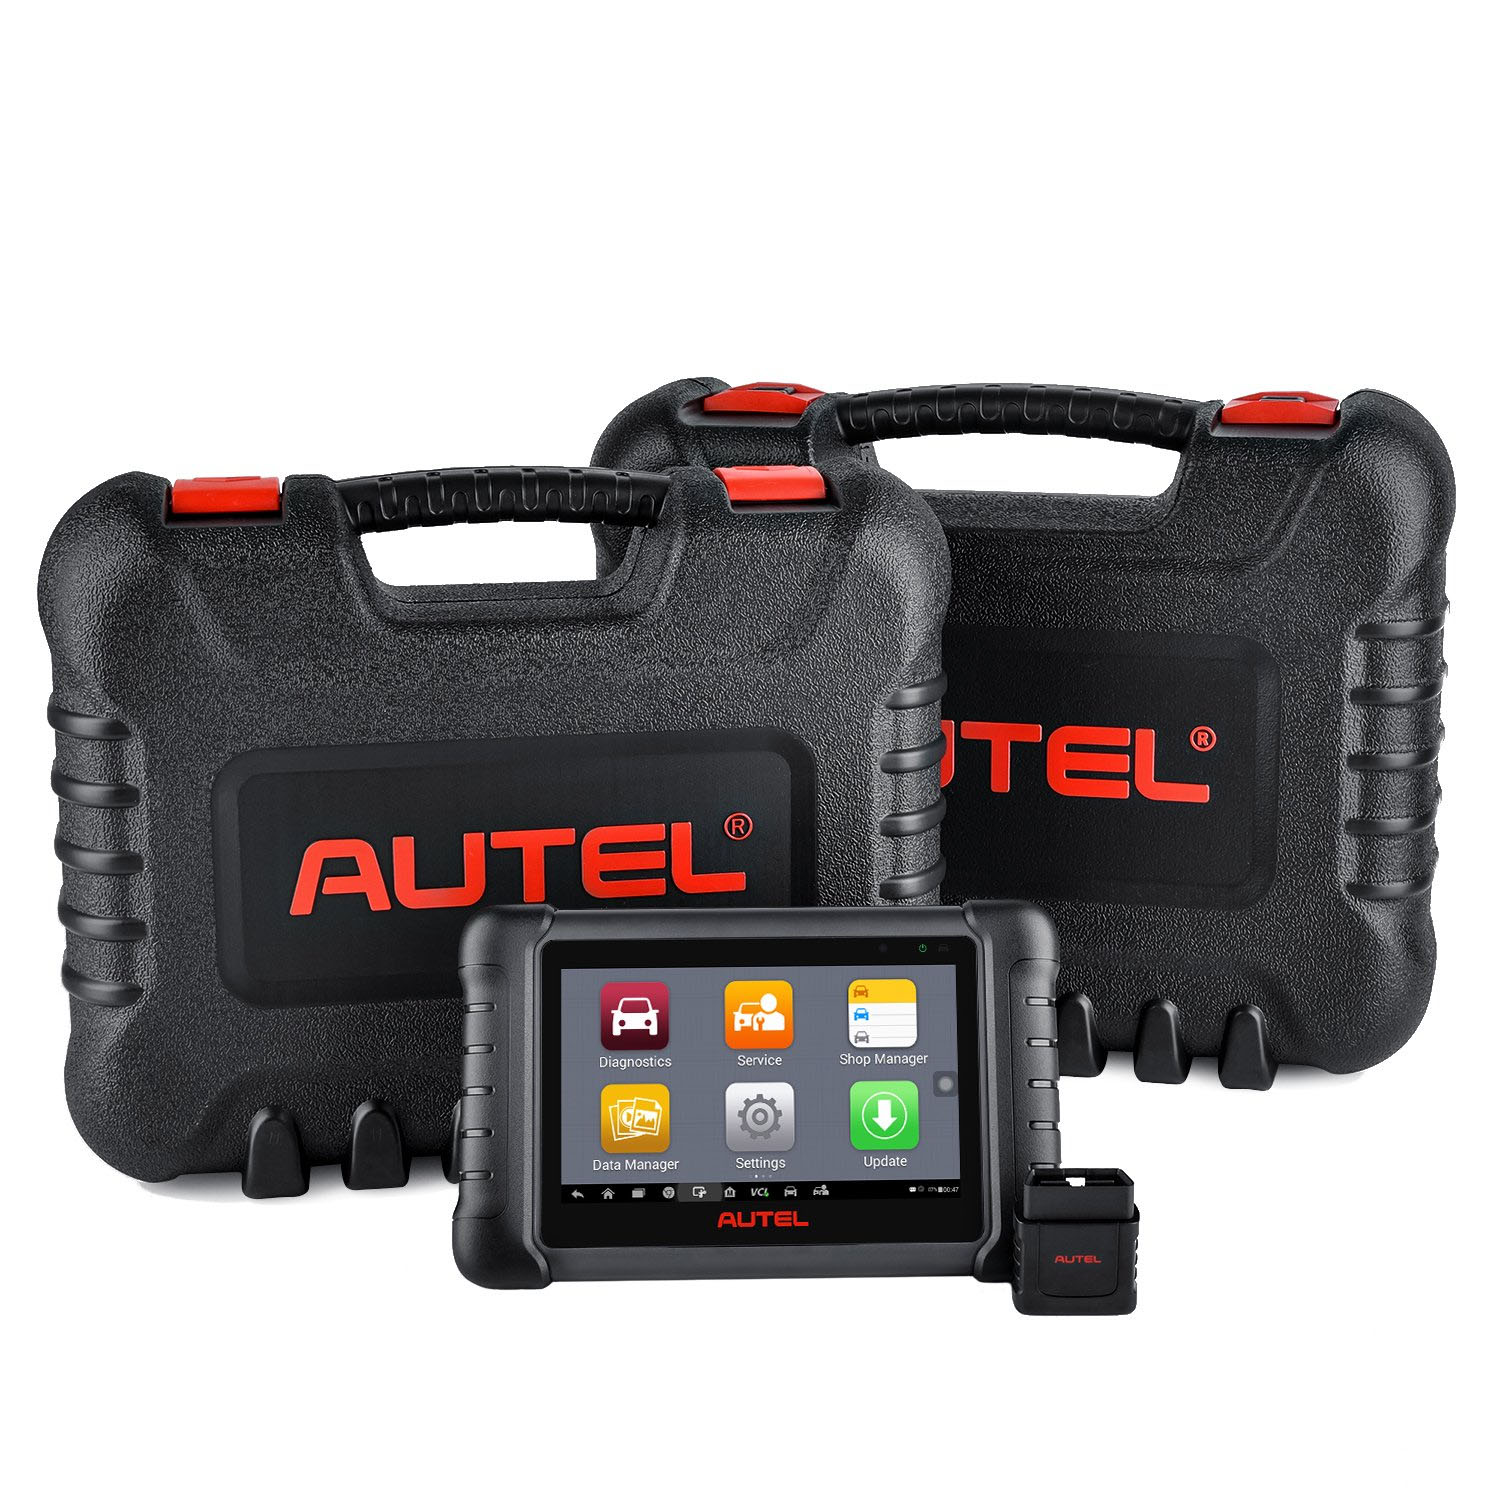  Autel MaxiPRO MP808S PRO Version with All 11 Adapters